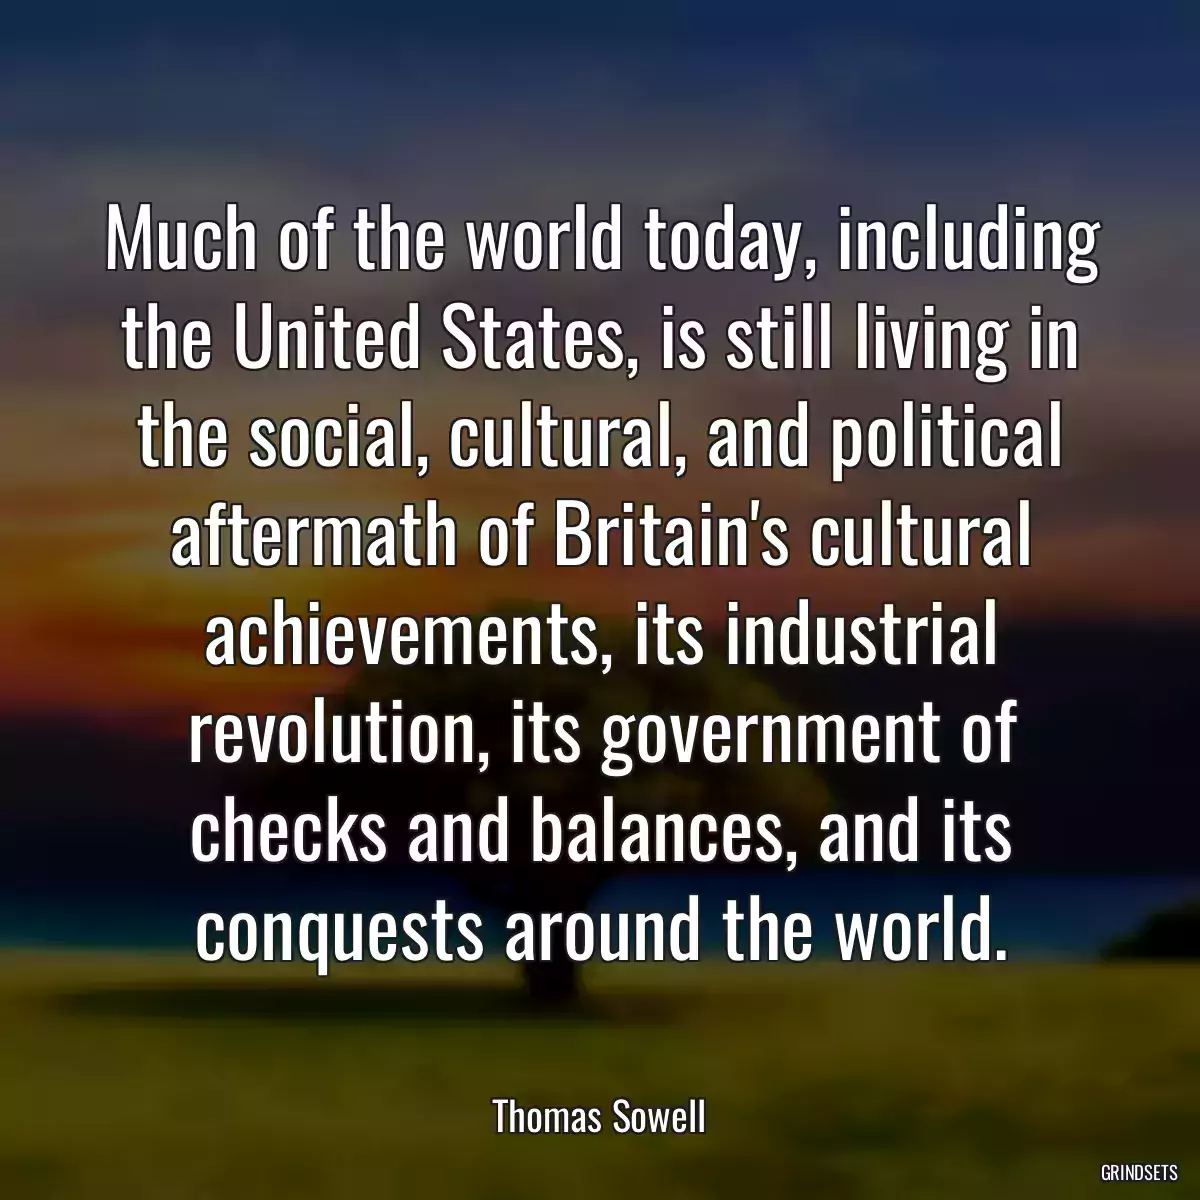 Much of the world today, including the United States, is still living in the social, cultural, and political aftermath of Britain\'s cultural achievements, its industrial revolution, its government of checks and balances, and its conquests around the world.